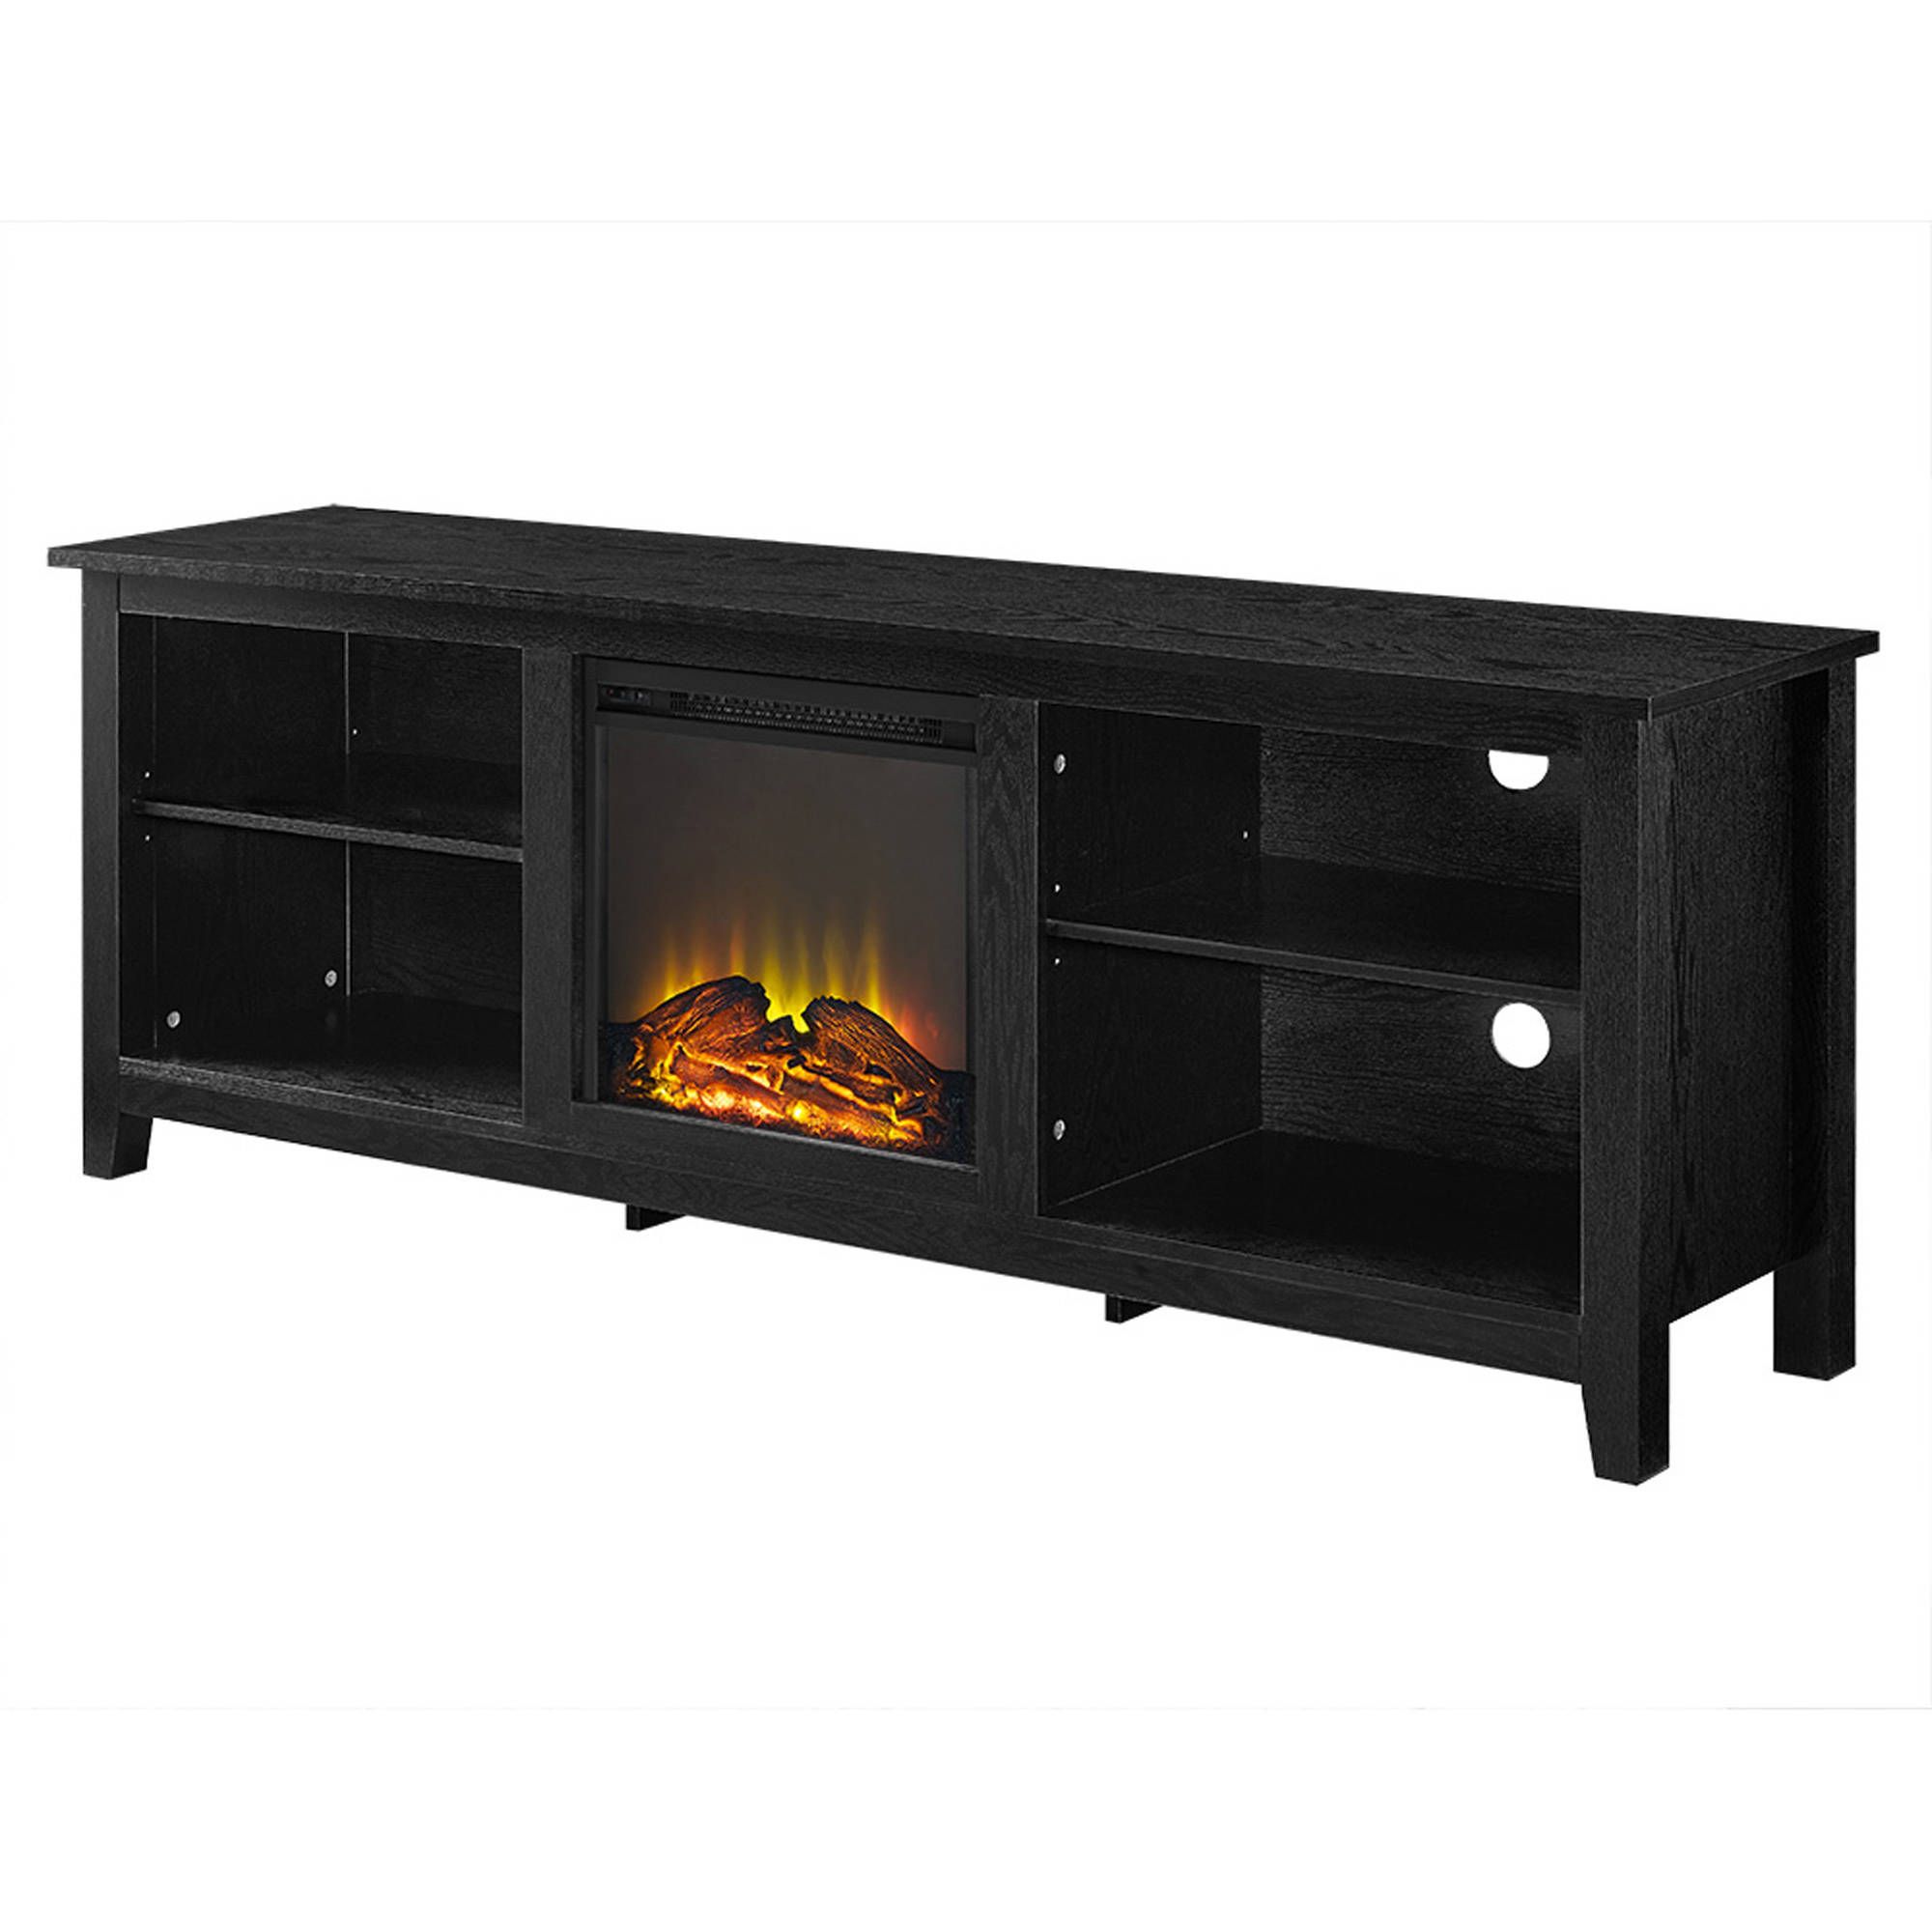 We Furniture Az70fp18bl 70" Wood Fireplace Tv Stand Black (View 17 of 20)